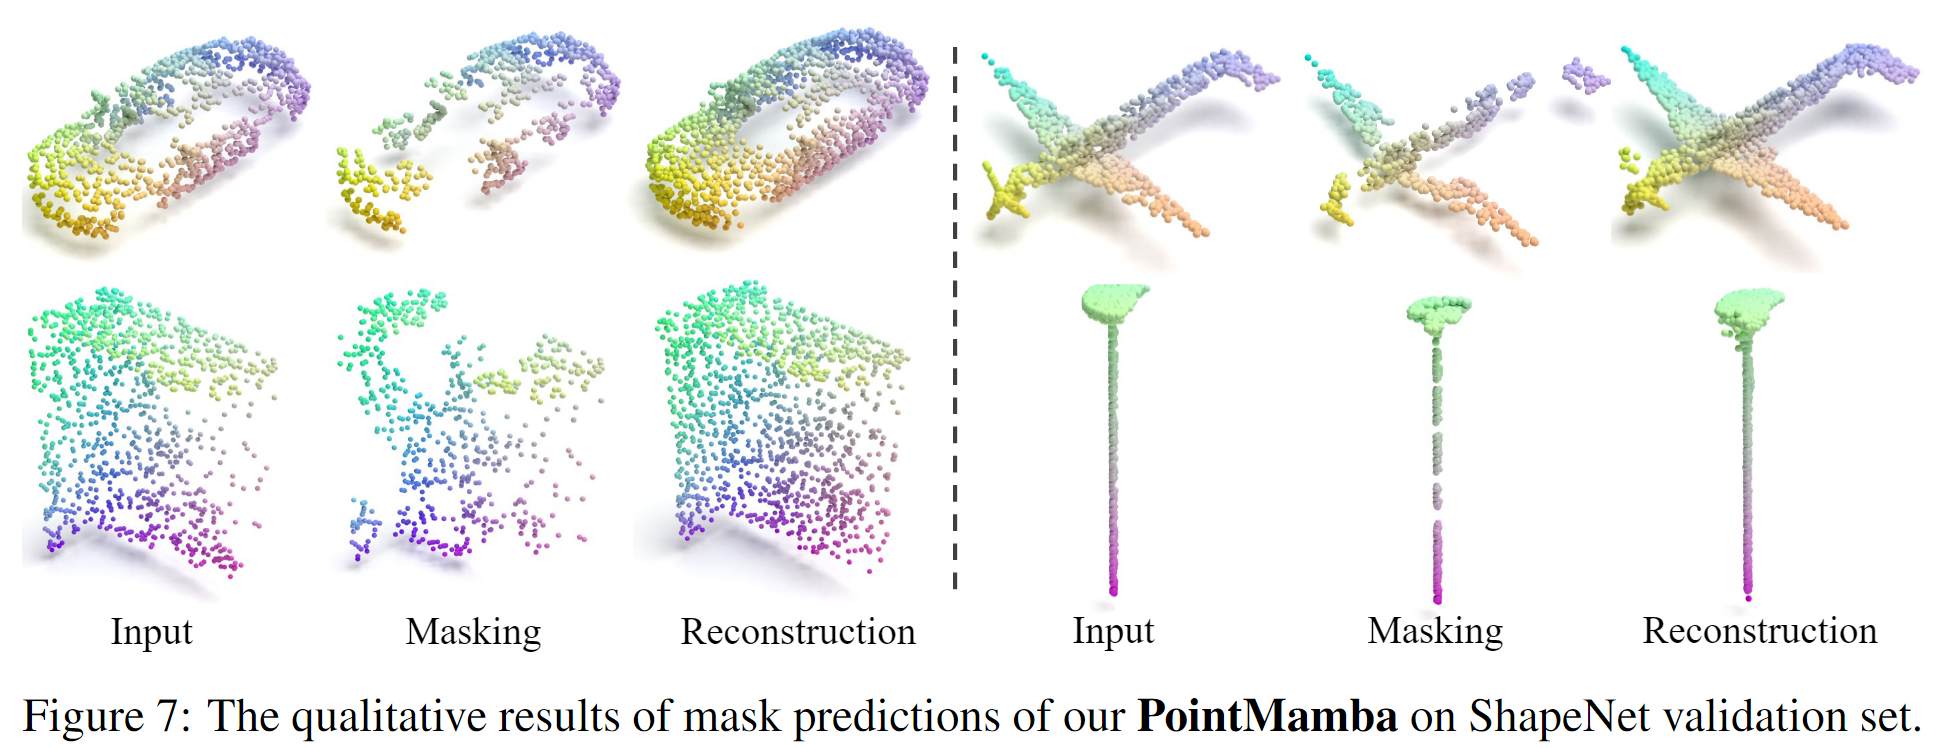 PointMamba: A Simple State Space Model for Point Cloud Analysis